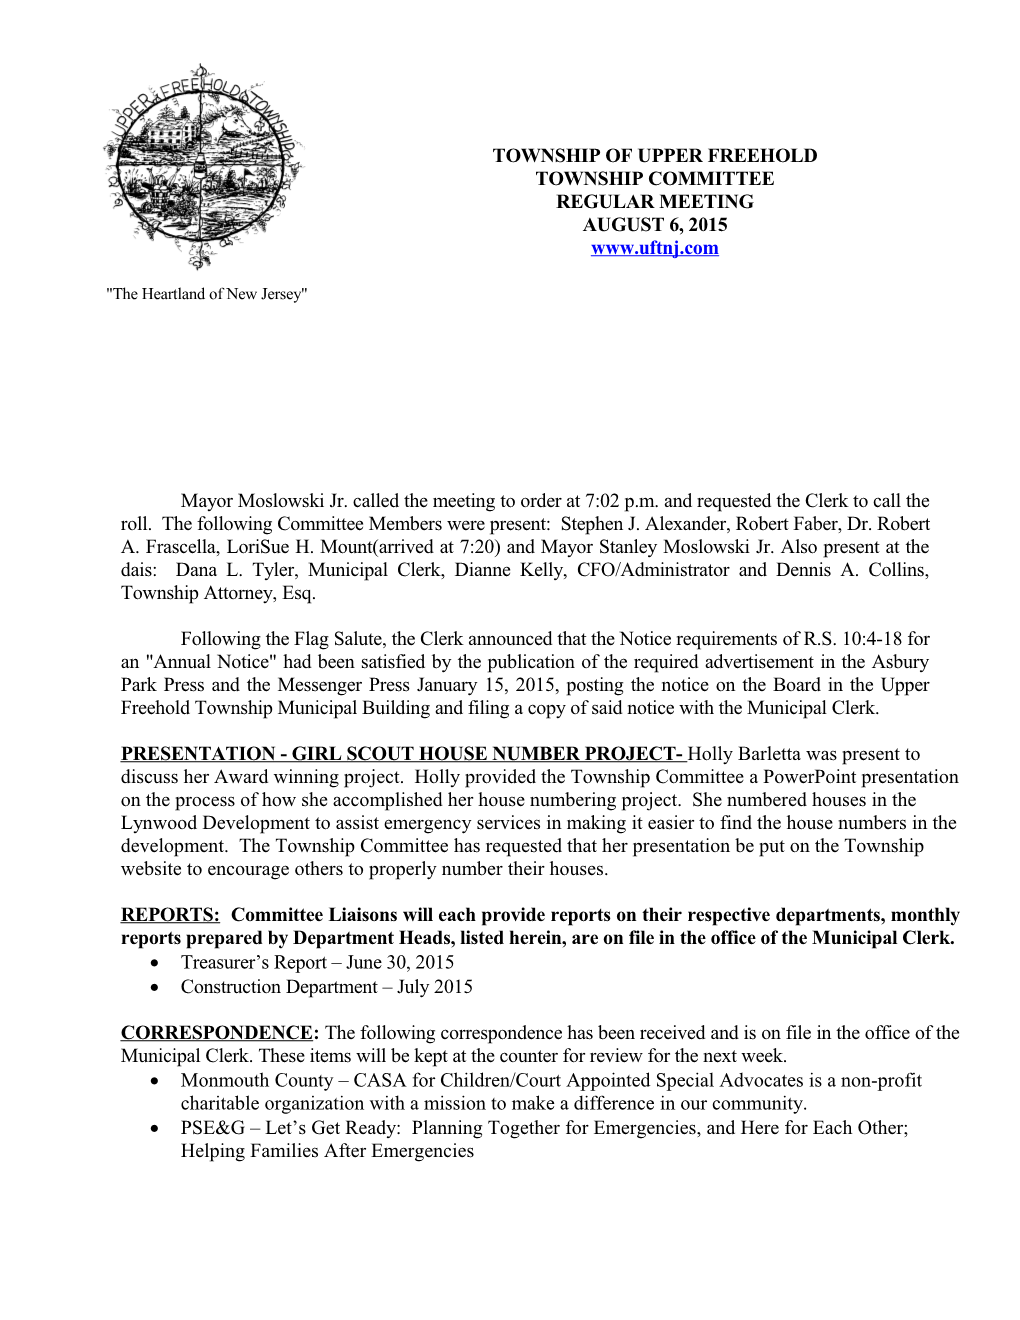 Upper Freehold Township Committee Regular Meeting August 6, 2015